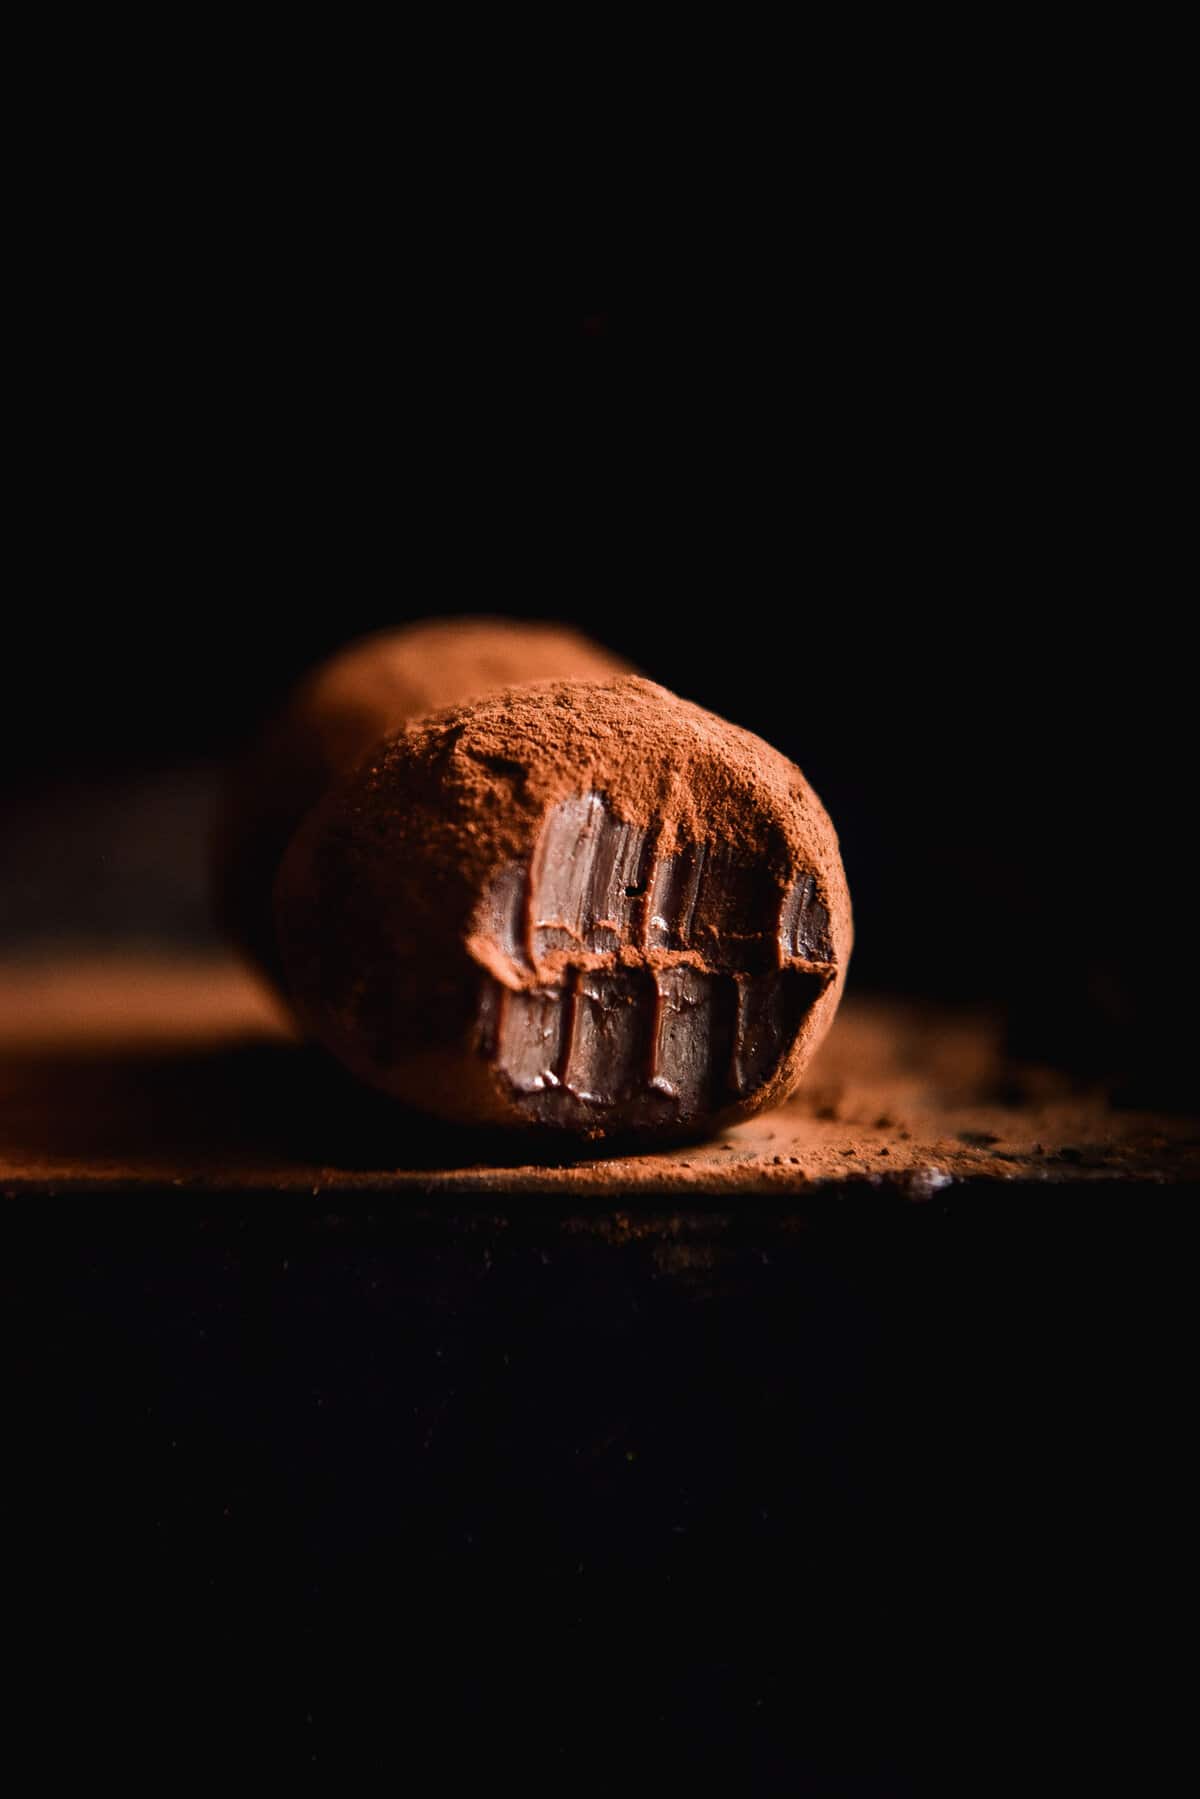 A moody side on image of a vegan Nutella truffle against a black backdrop. The truffle is coated with cocoa powder and has a bite mark taken out of the front of the truffle, exposing the rich chocolate inside.